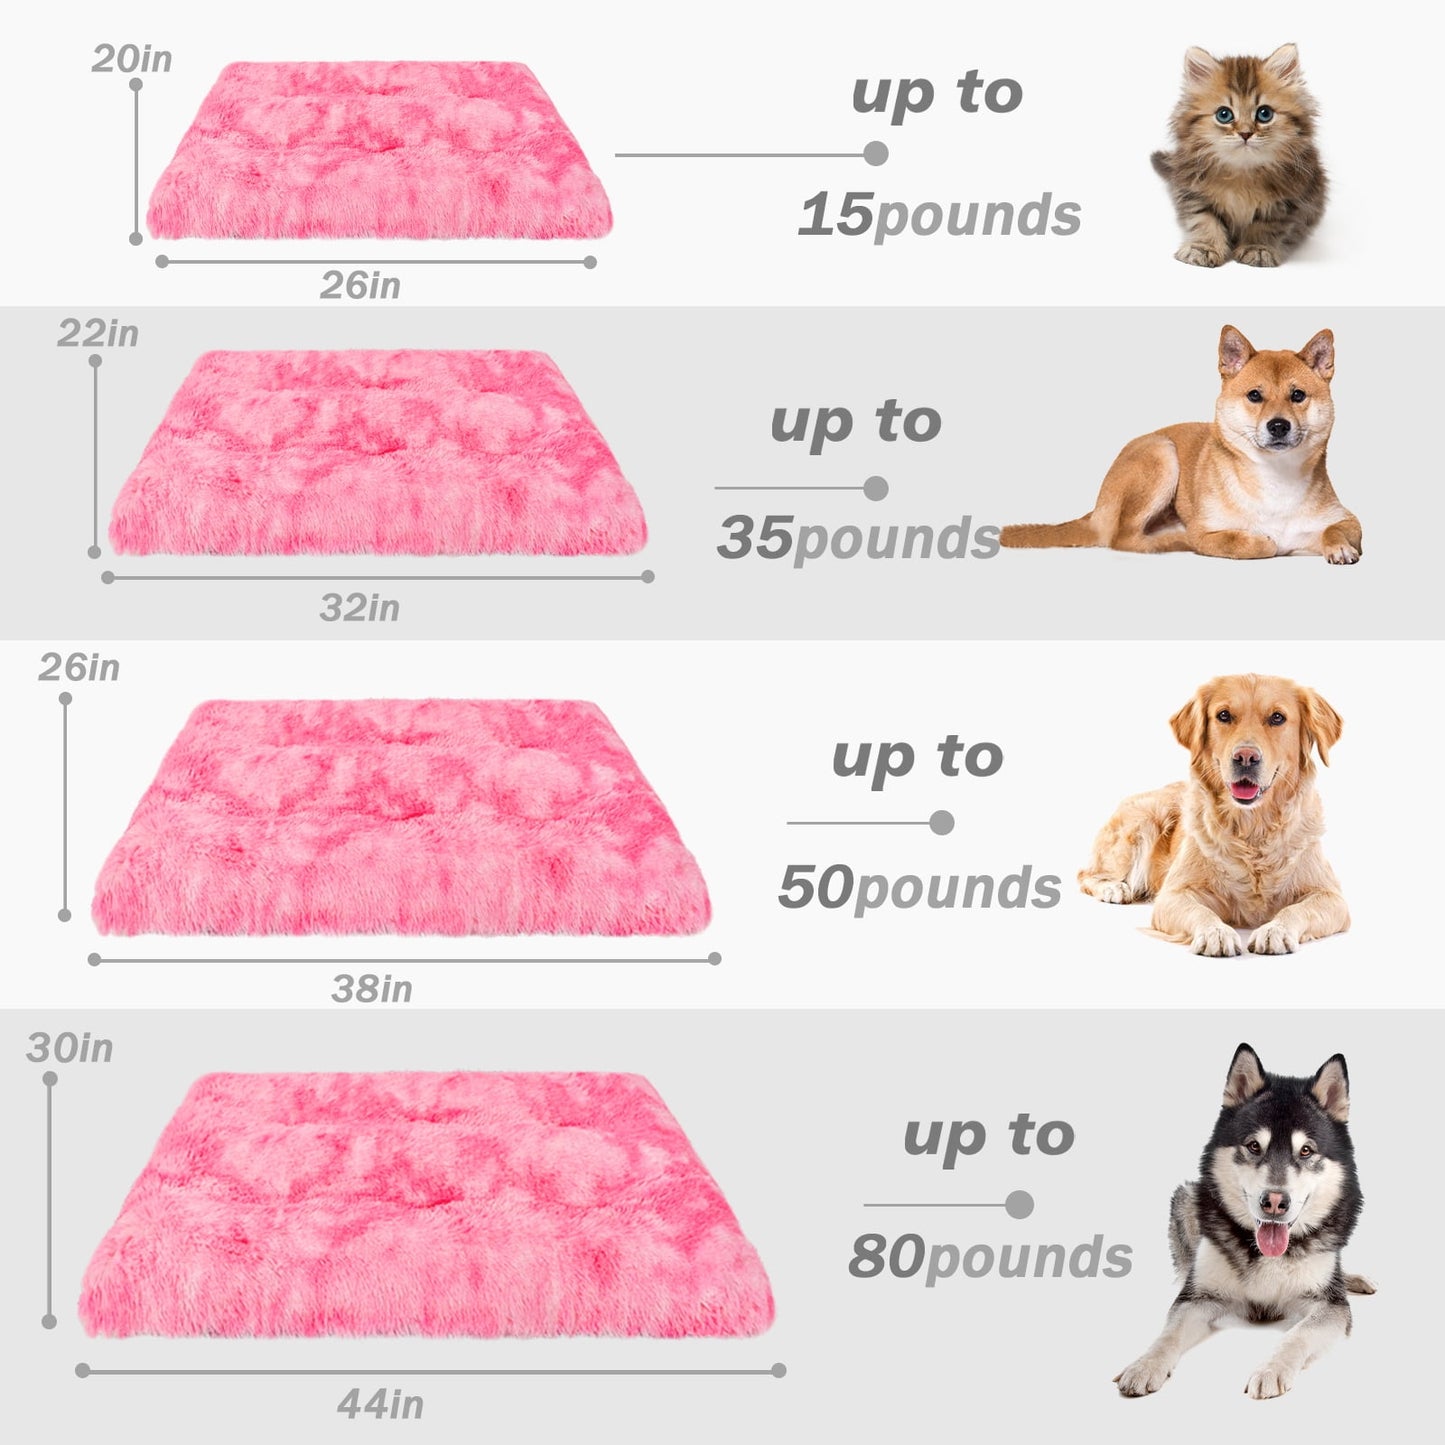 Exclusivo Mecla Soft Plush Dog Bed Crate Mat for Small Dogs (32*22*4 in), Faux Fur Fluffy Dog Pet Cat Kennel Pad with Anti-Slip Bottom, Machine Washable Gradient Pink